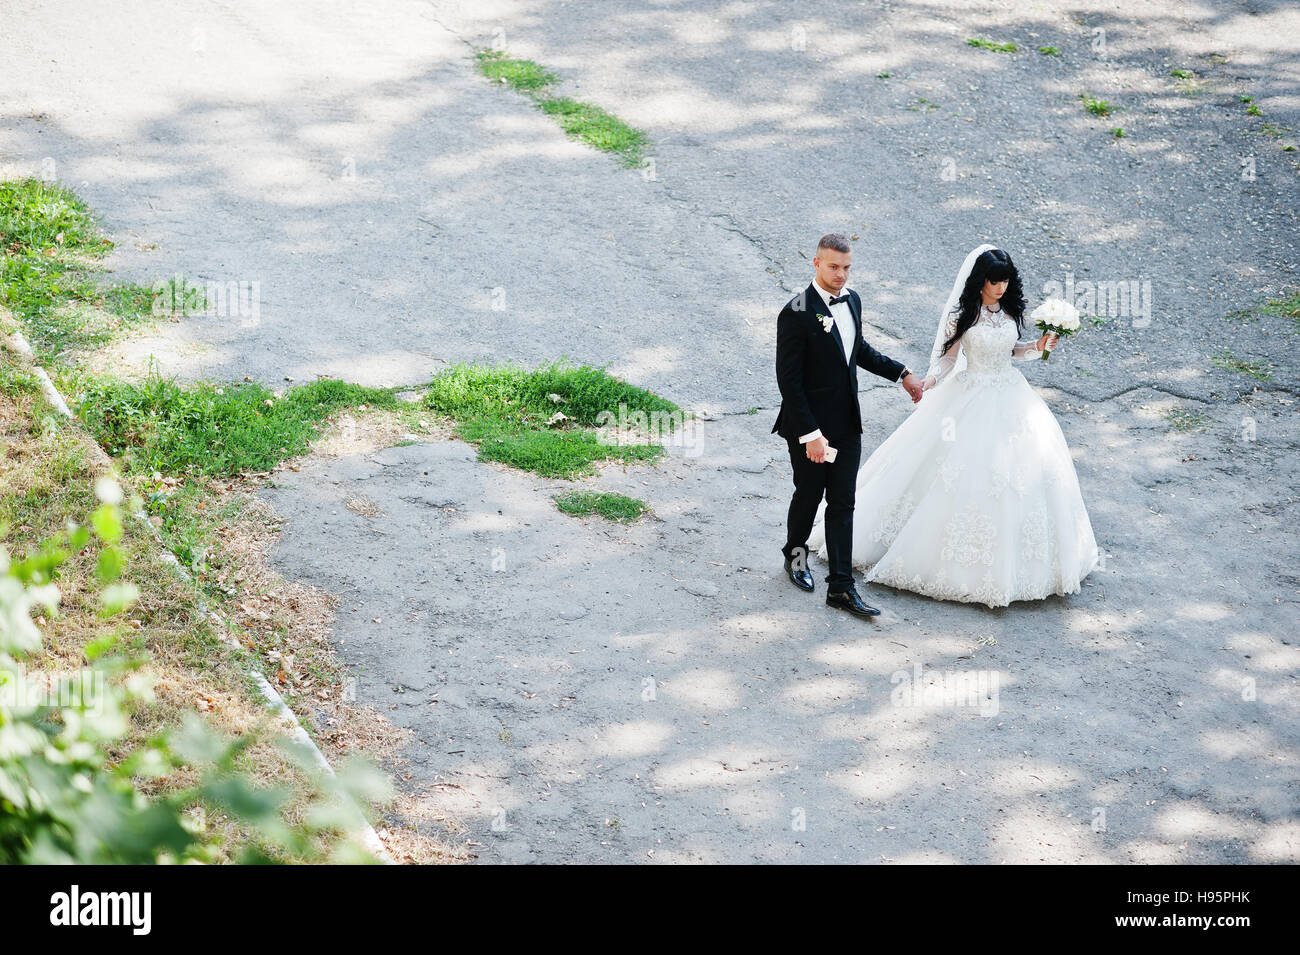 View from above of stylish wedding couple on road at park. Stock Photo